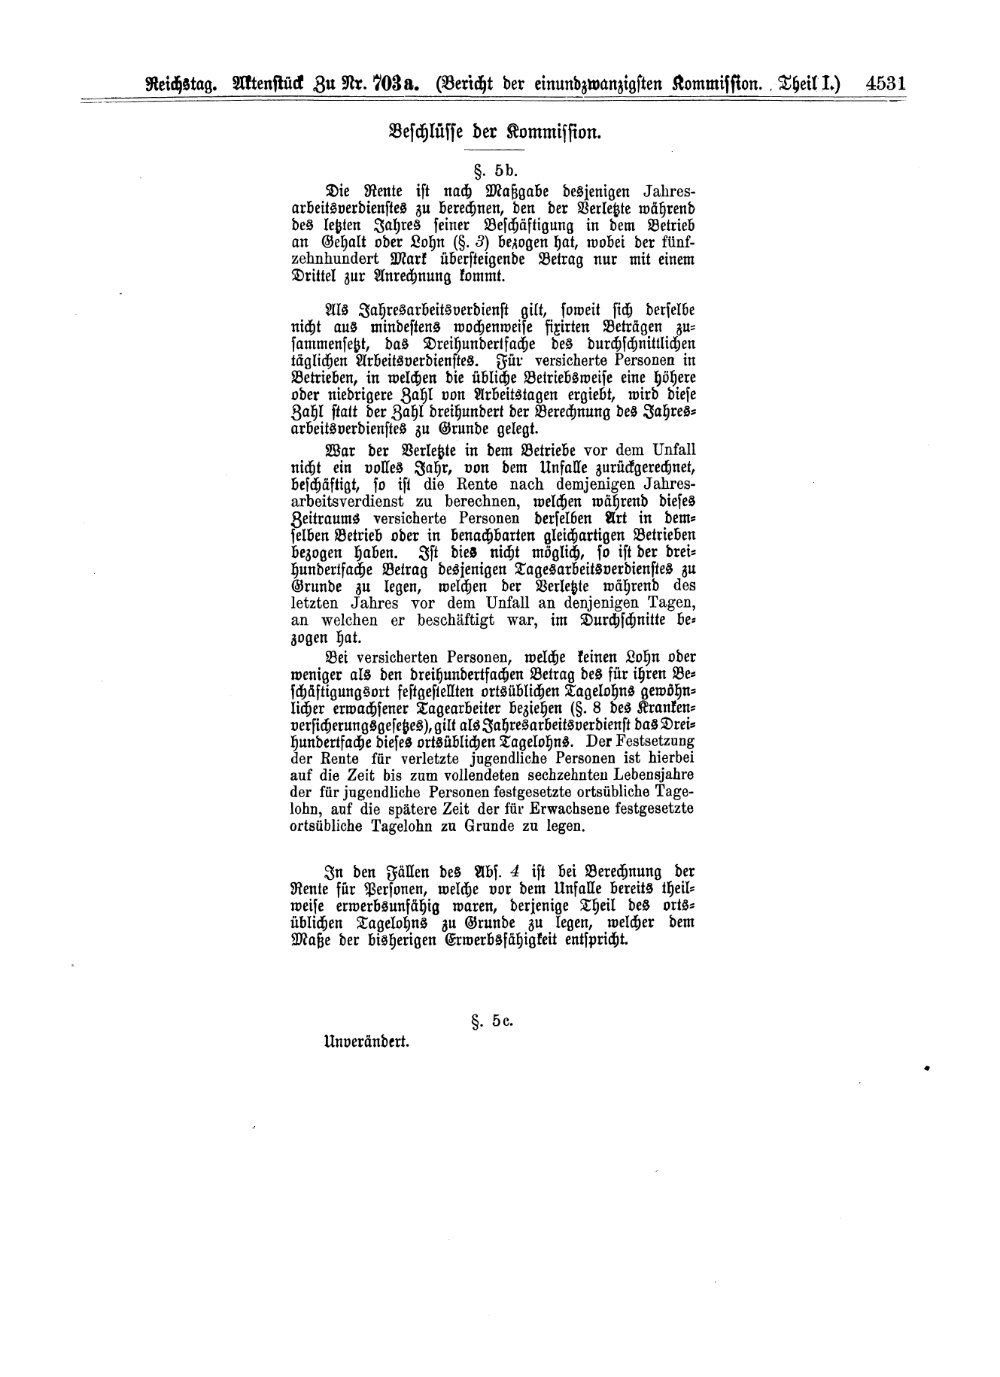 Scan of page 4531